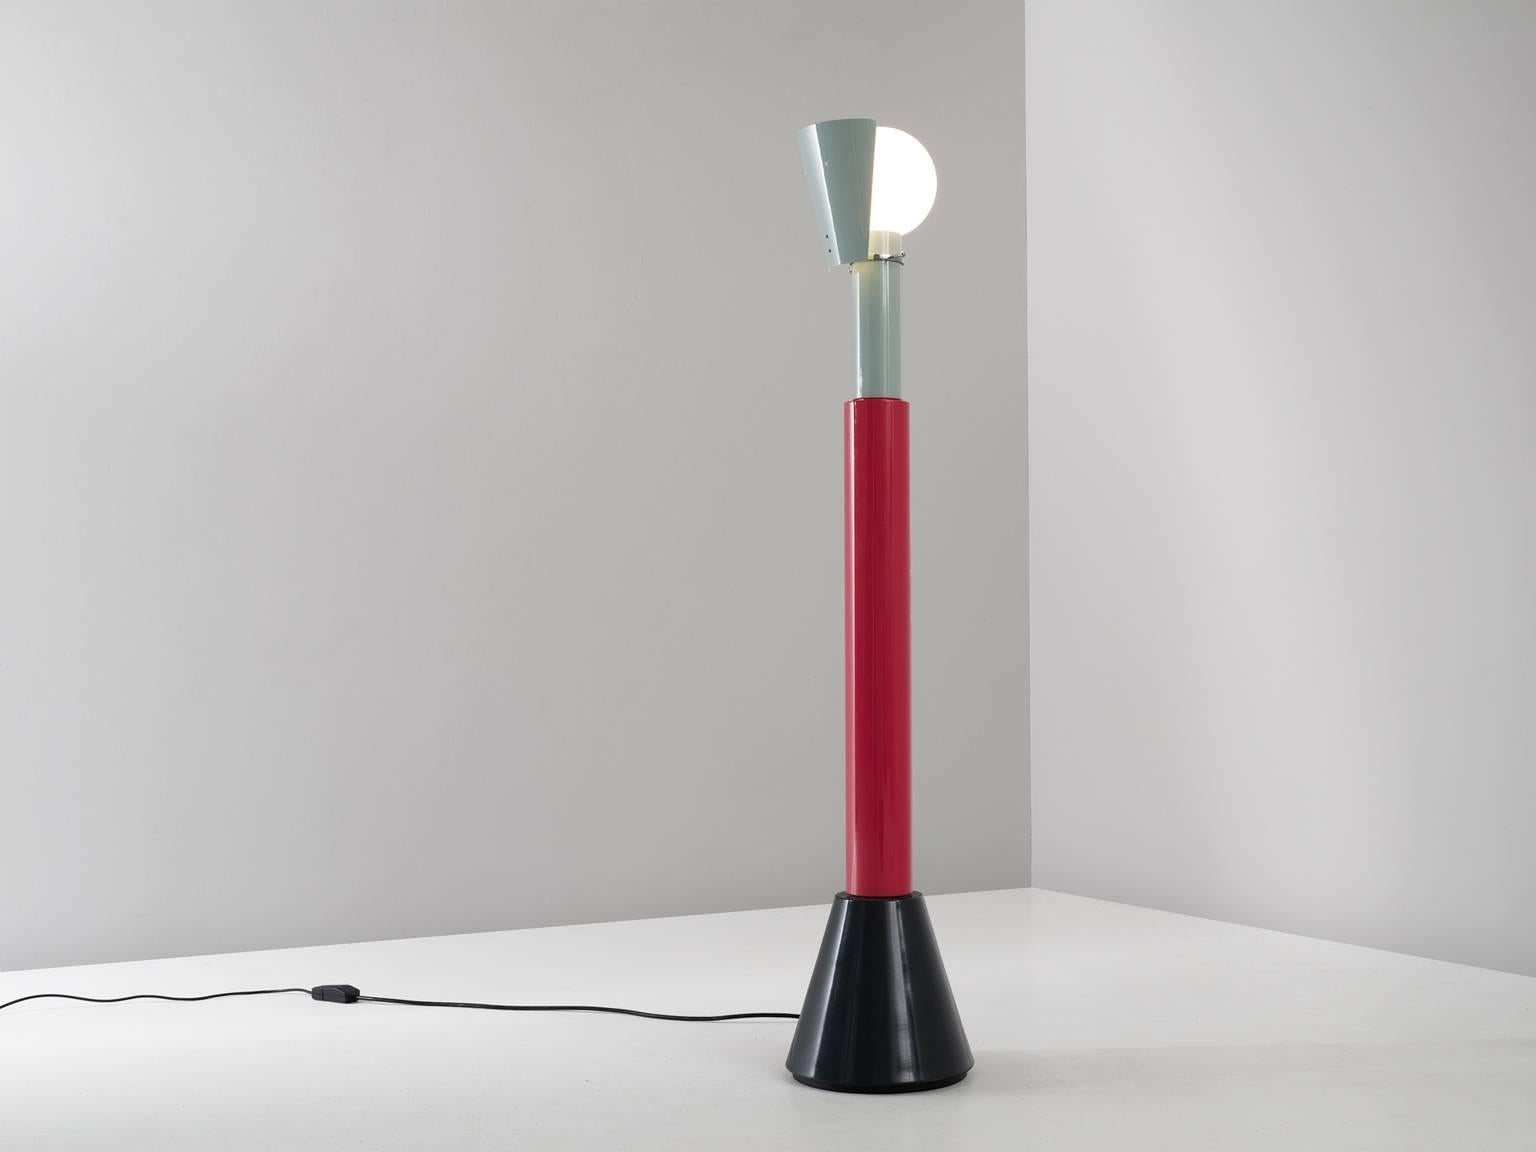 Alessandro Mendini for Segno, floor lamp 'Milo', enameled metal and glass, by  Italy 1982. 

Flighty floor lamp in the style of Memphis. Simplified representation of a male figure. Black base with colorful stern in red and green and glass sphere